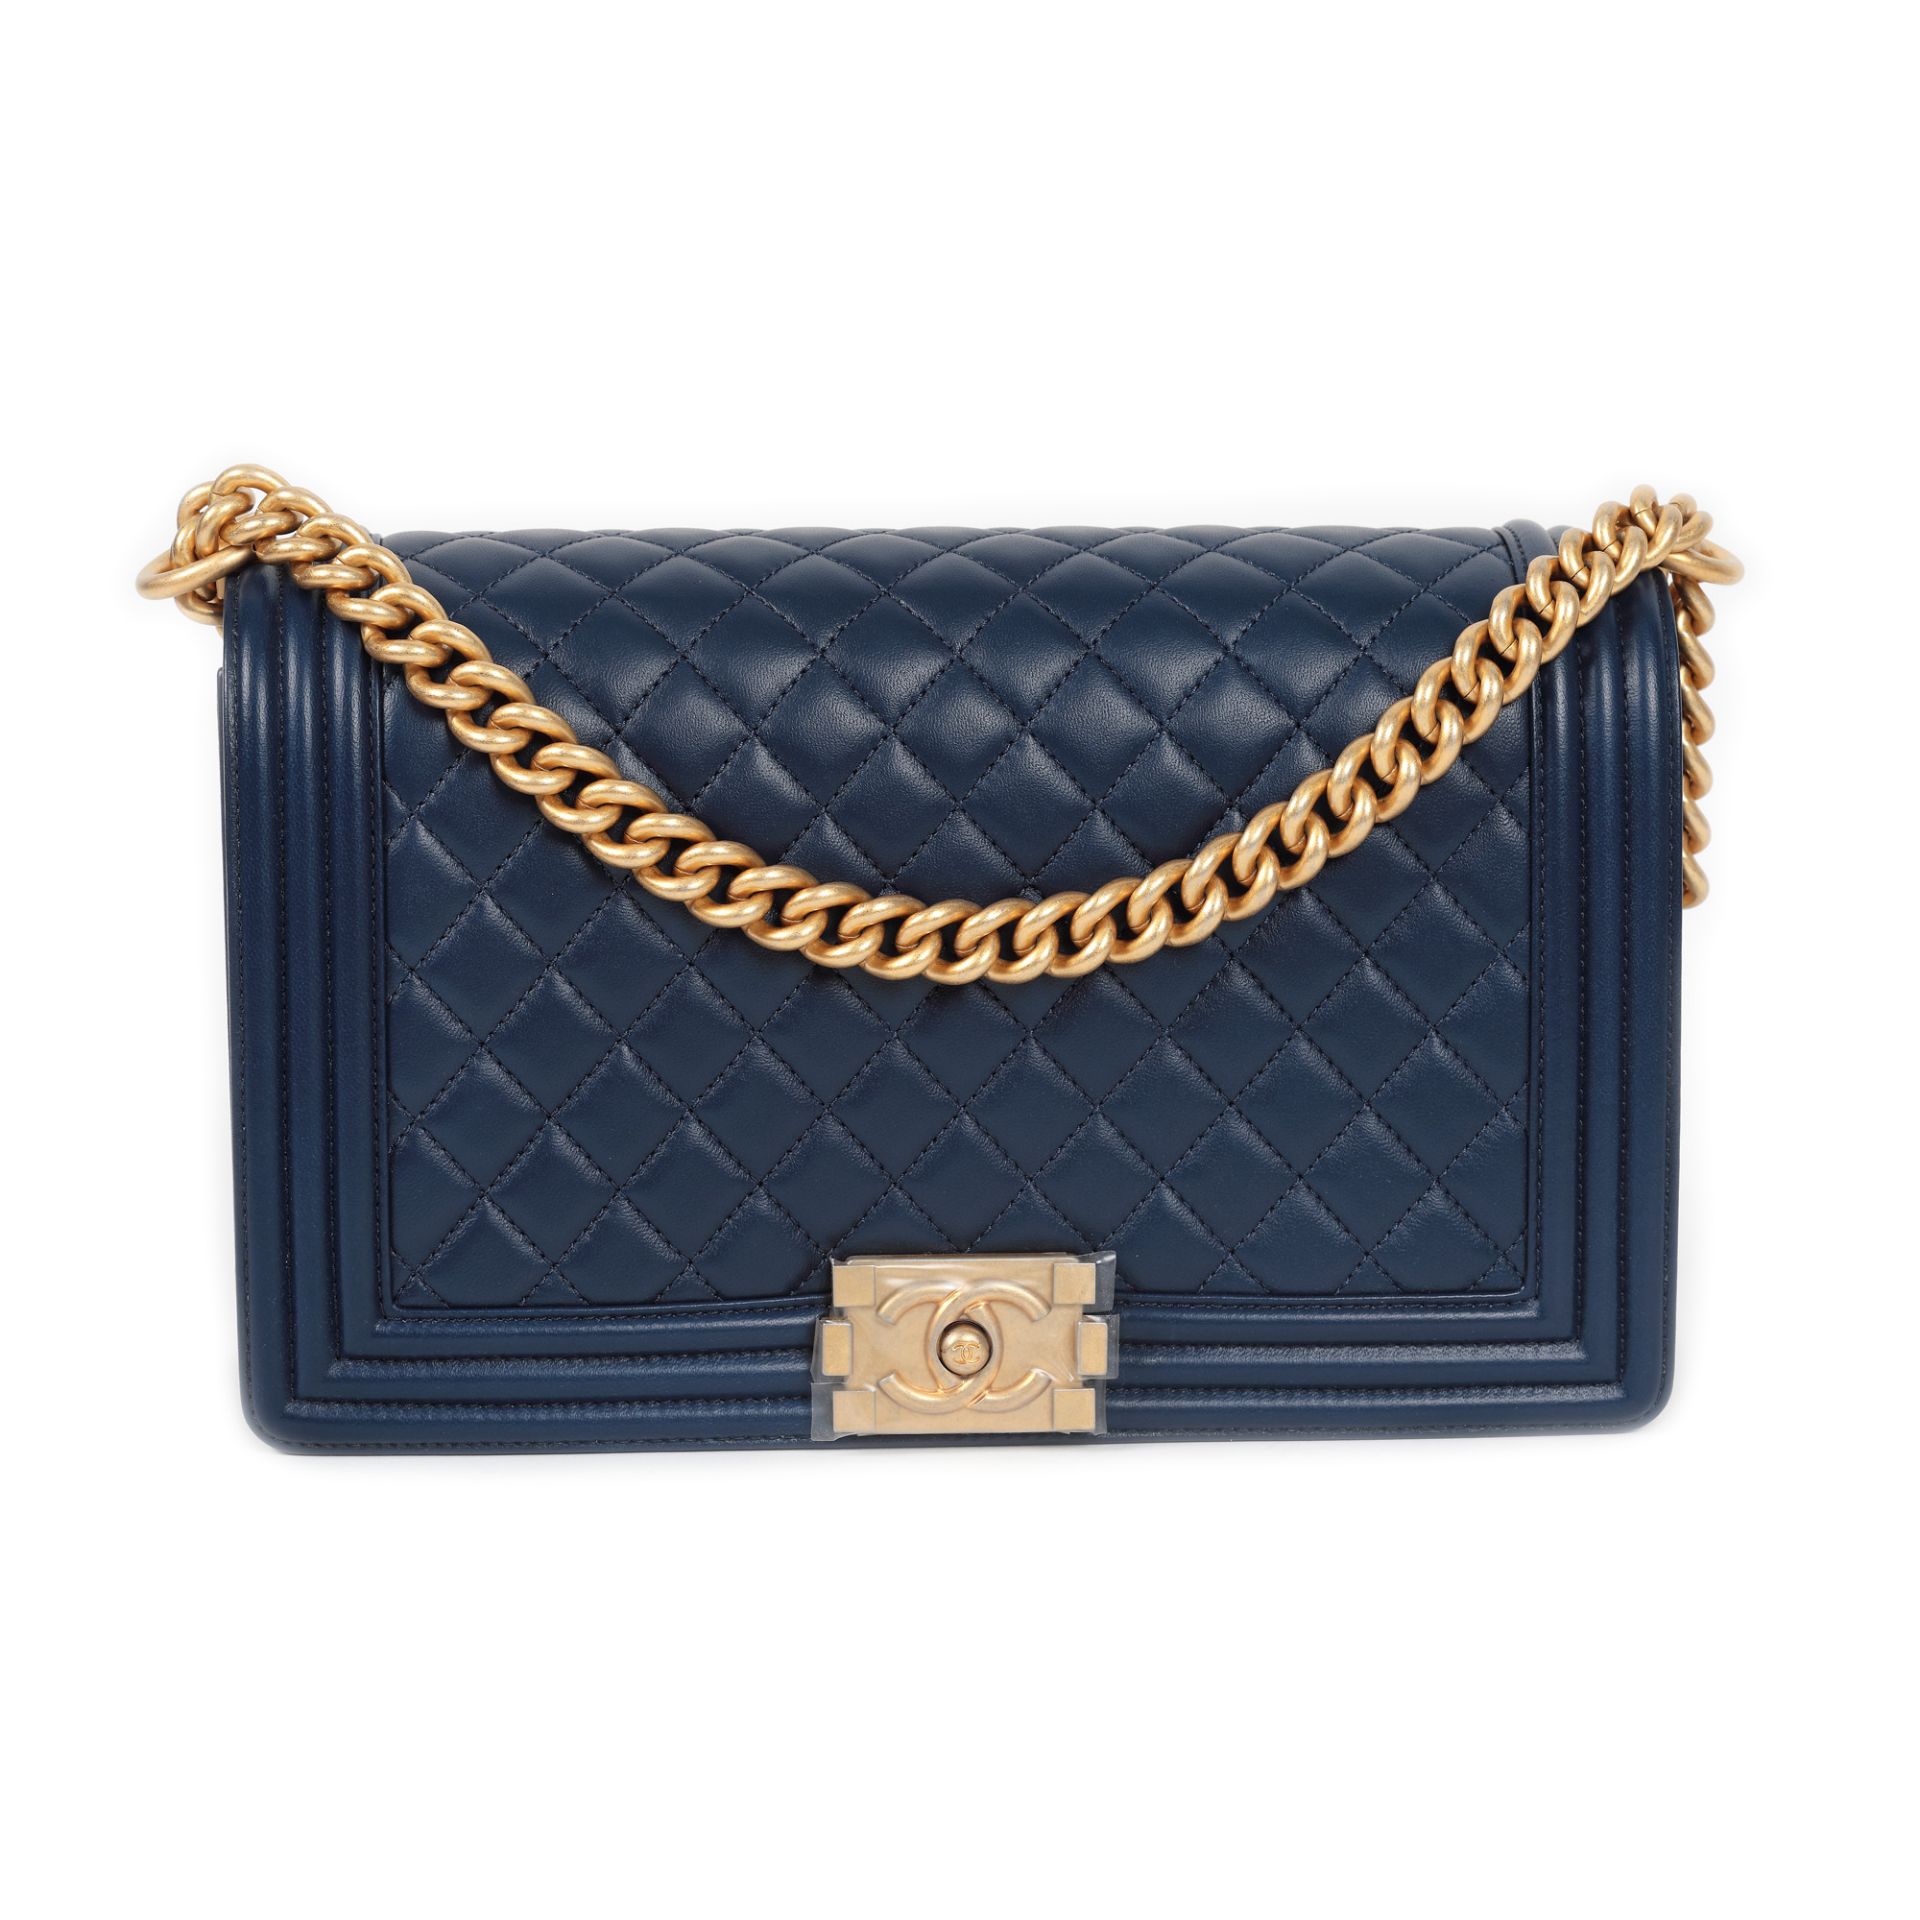 "Boy" - Chanel bag, quilted leather, blue, authenticity card and original cover - Image 4 of 5